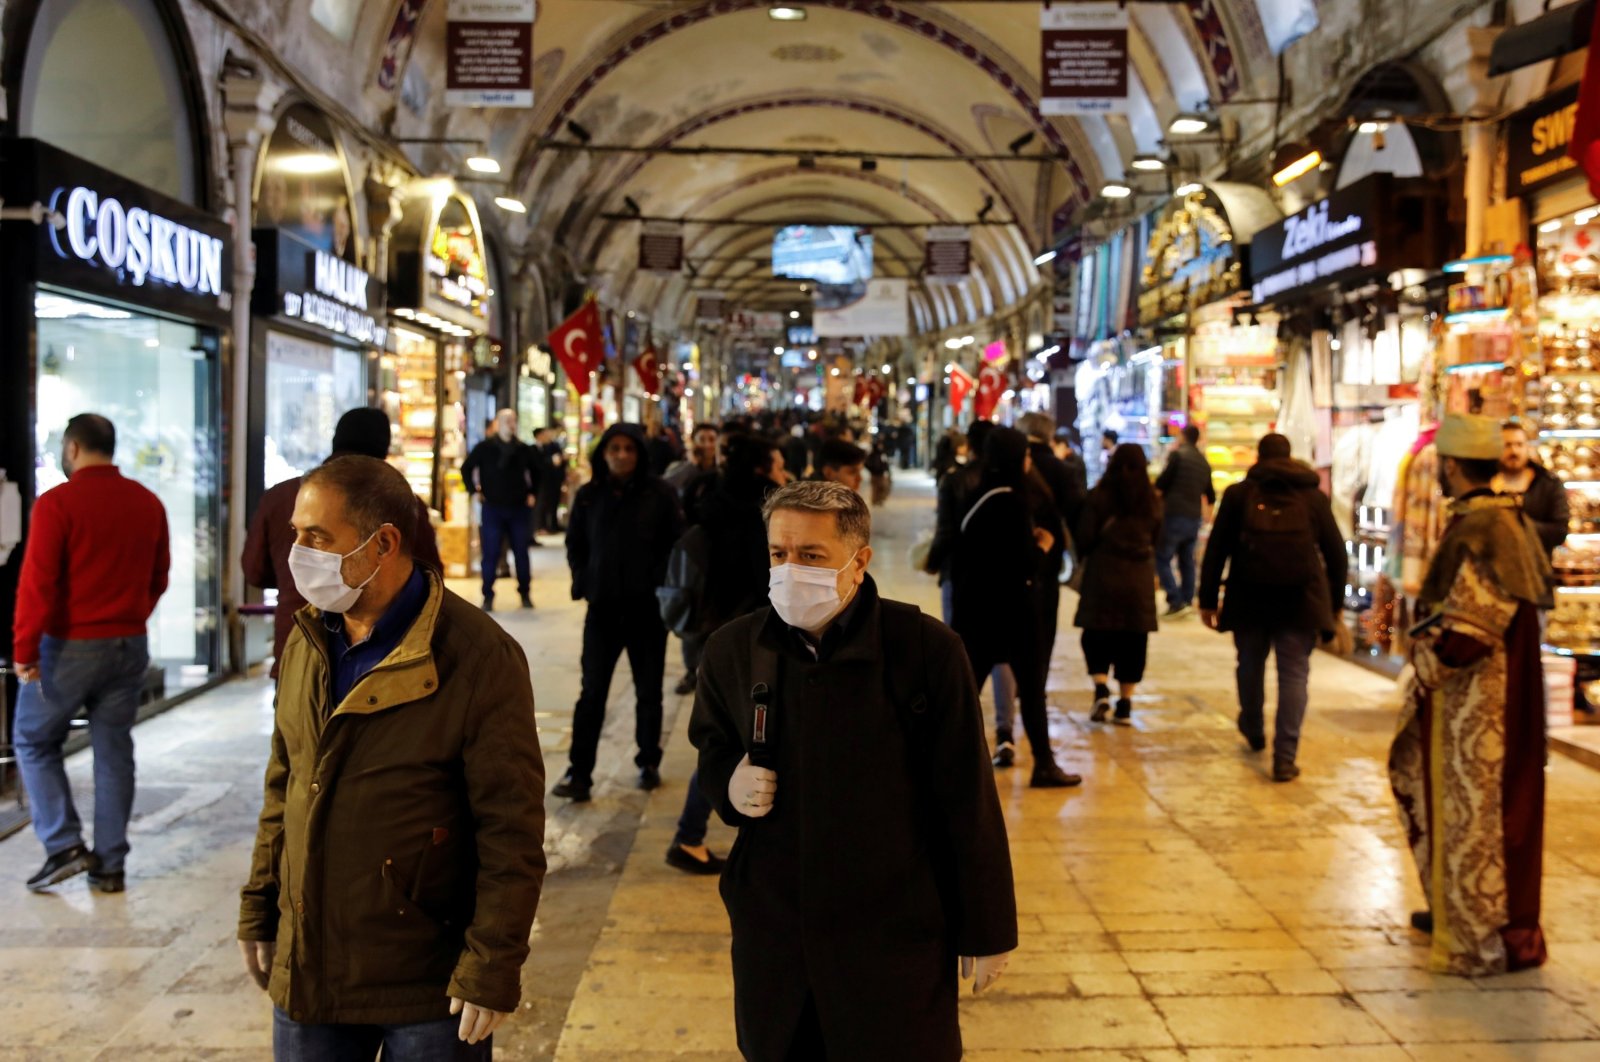 People wear protective face masks due to coronavirus concerns in historic Grand Bazaar, Istanbul, Turkey, March 16, 2020. (Reuters Photo)